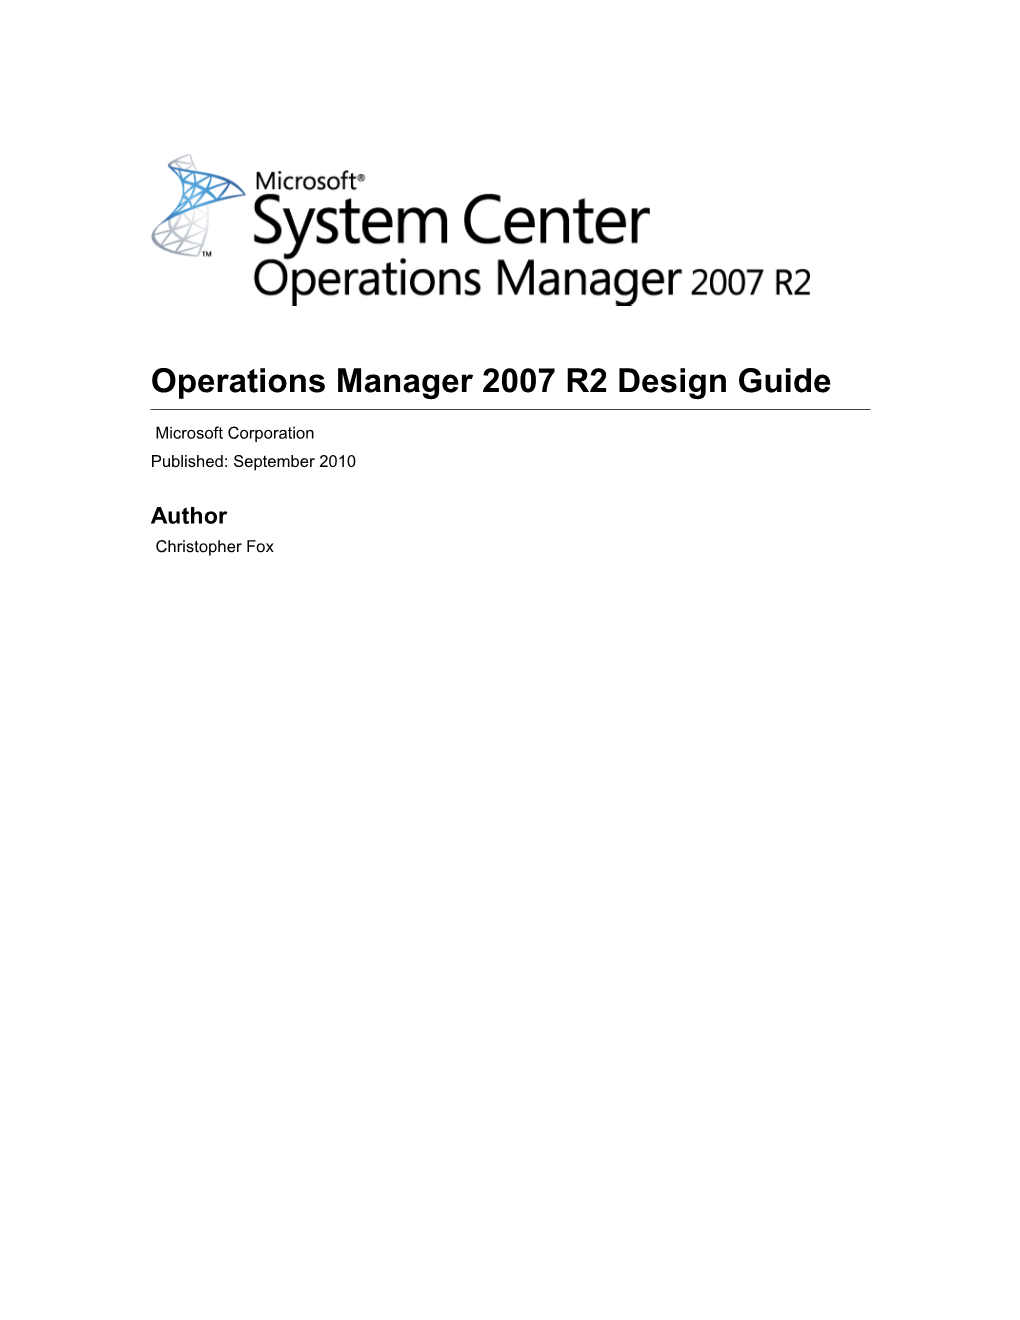 Operations Manager 2007 R2 Design Guide